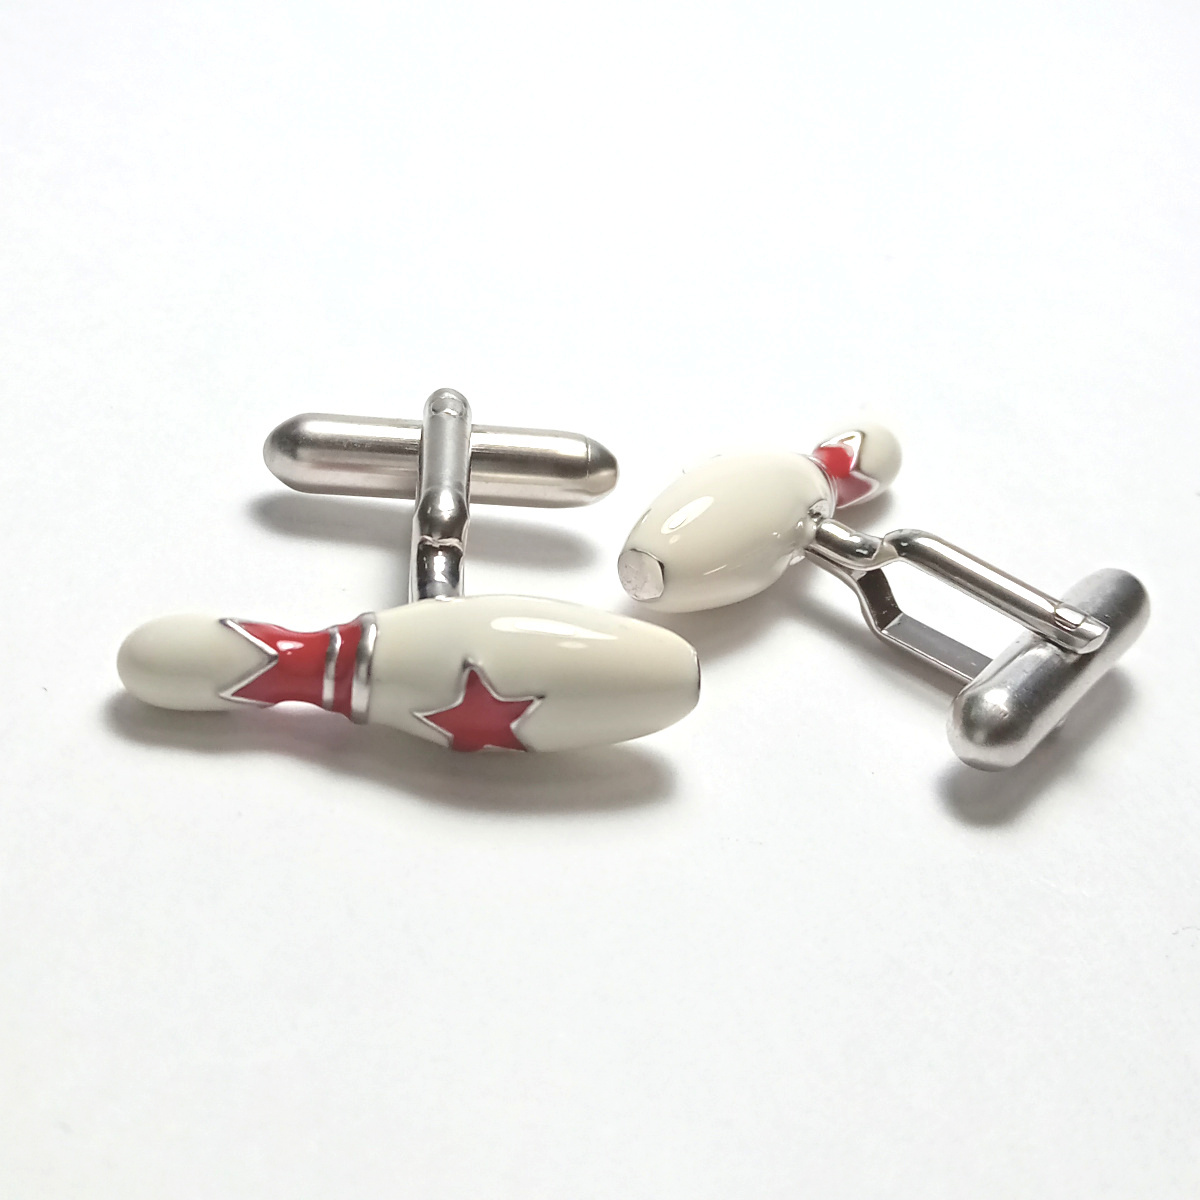 [swc23] new goods SWANKs one k cuffs cuff links bo- ring pin bowling white × red red 